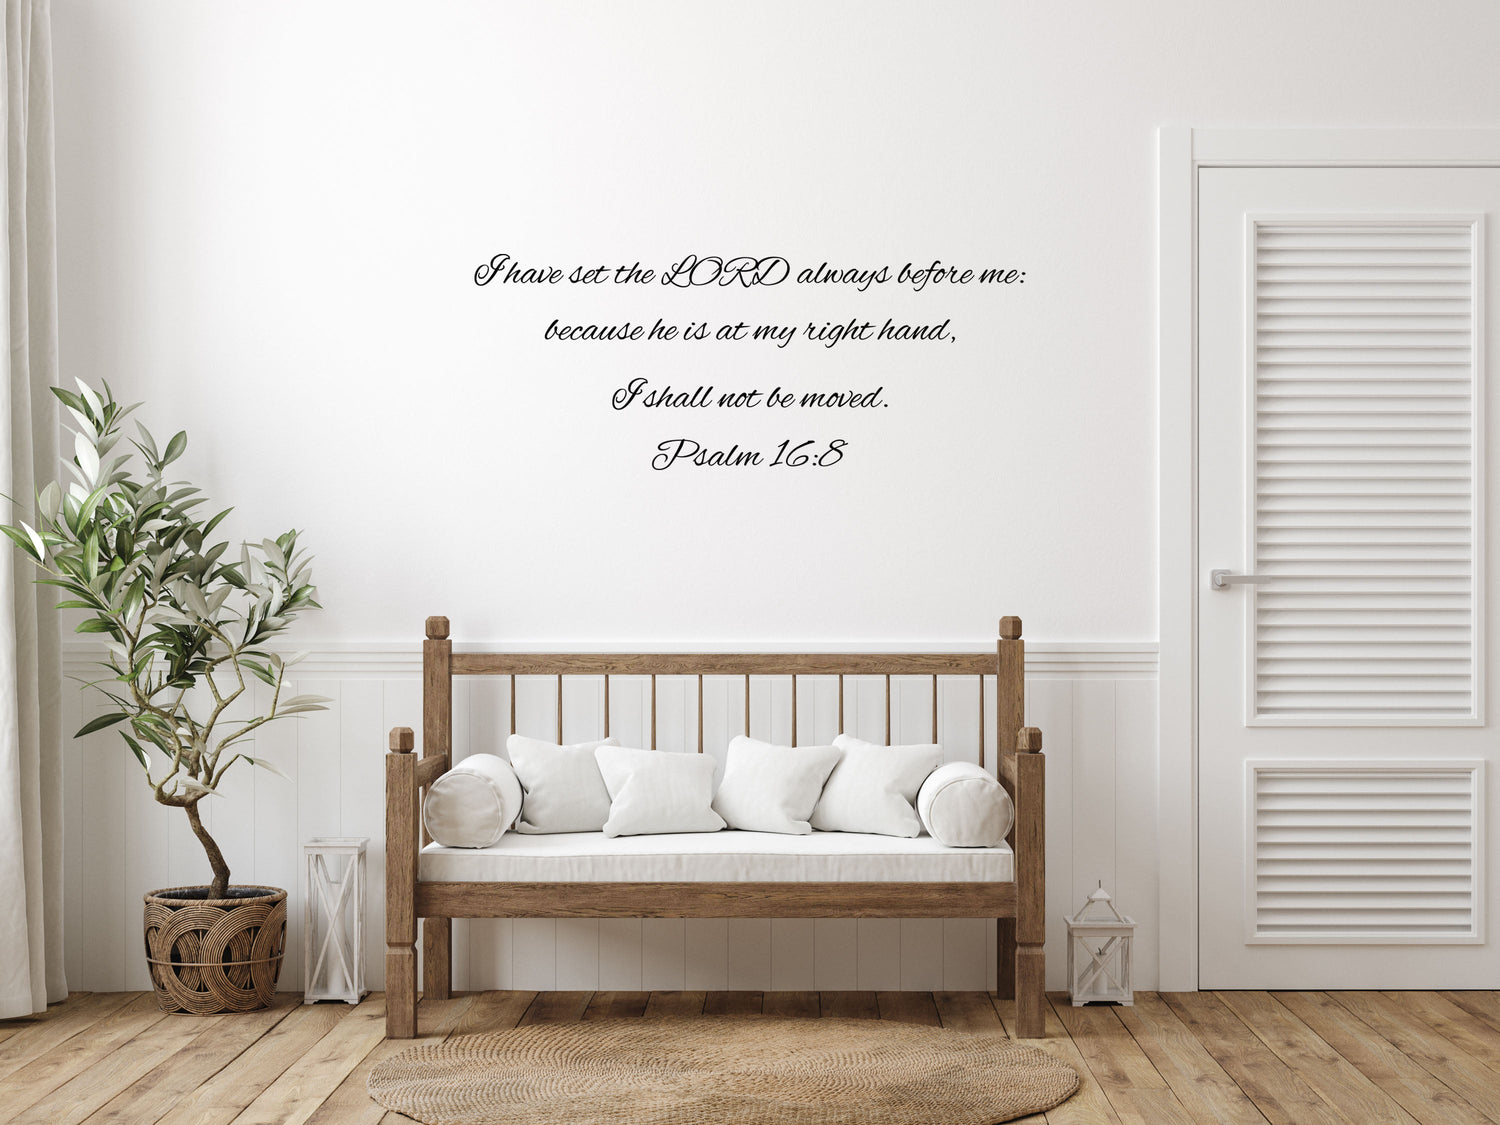 Psalm 16:8 - Religious Wall Decals Vinyl Wall Decal Inspirational Wall Signs 